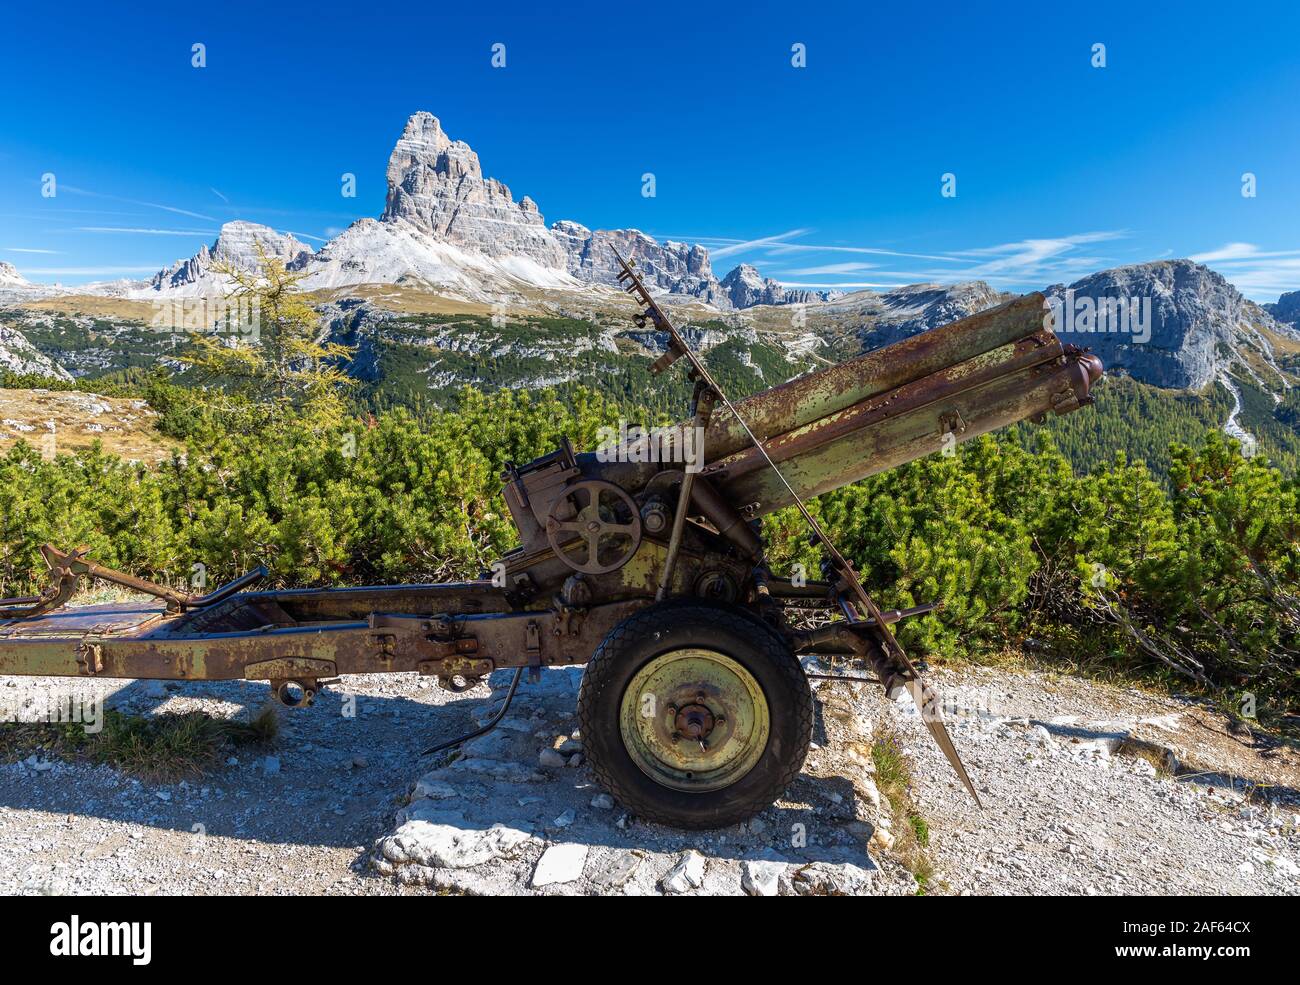 Cannon of World War One on Monte Piana, Dolomites Stock Photo